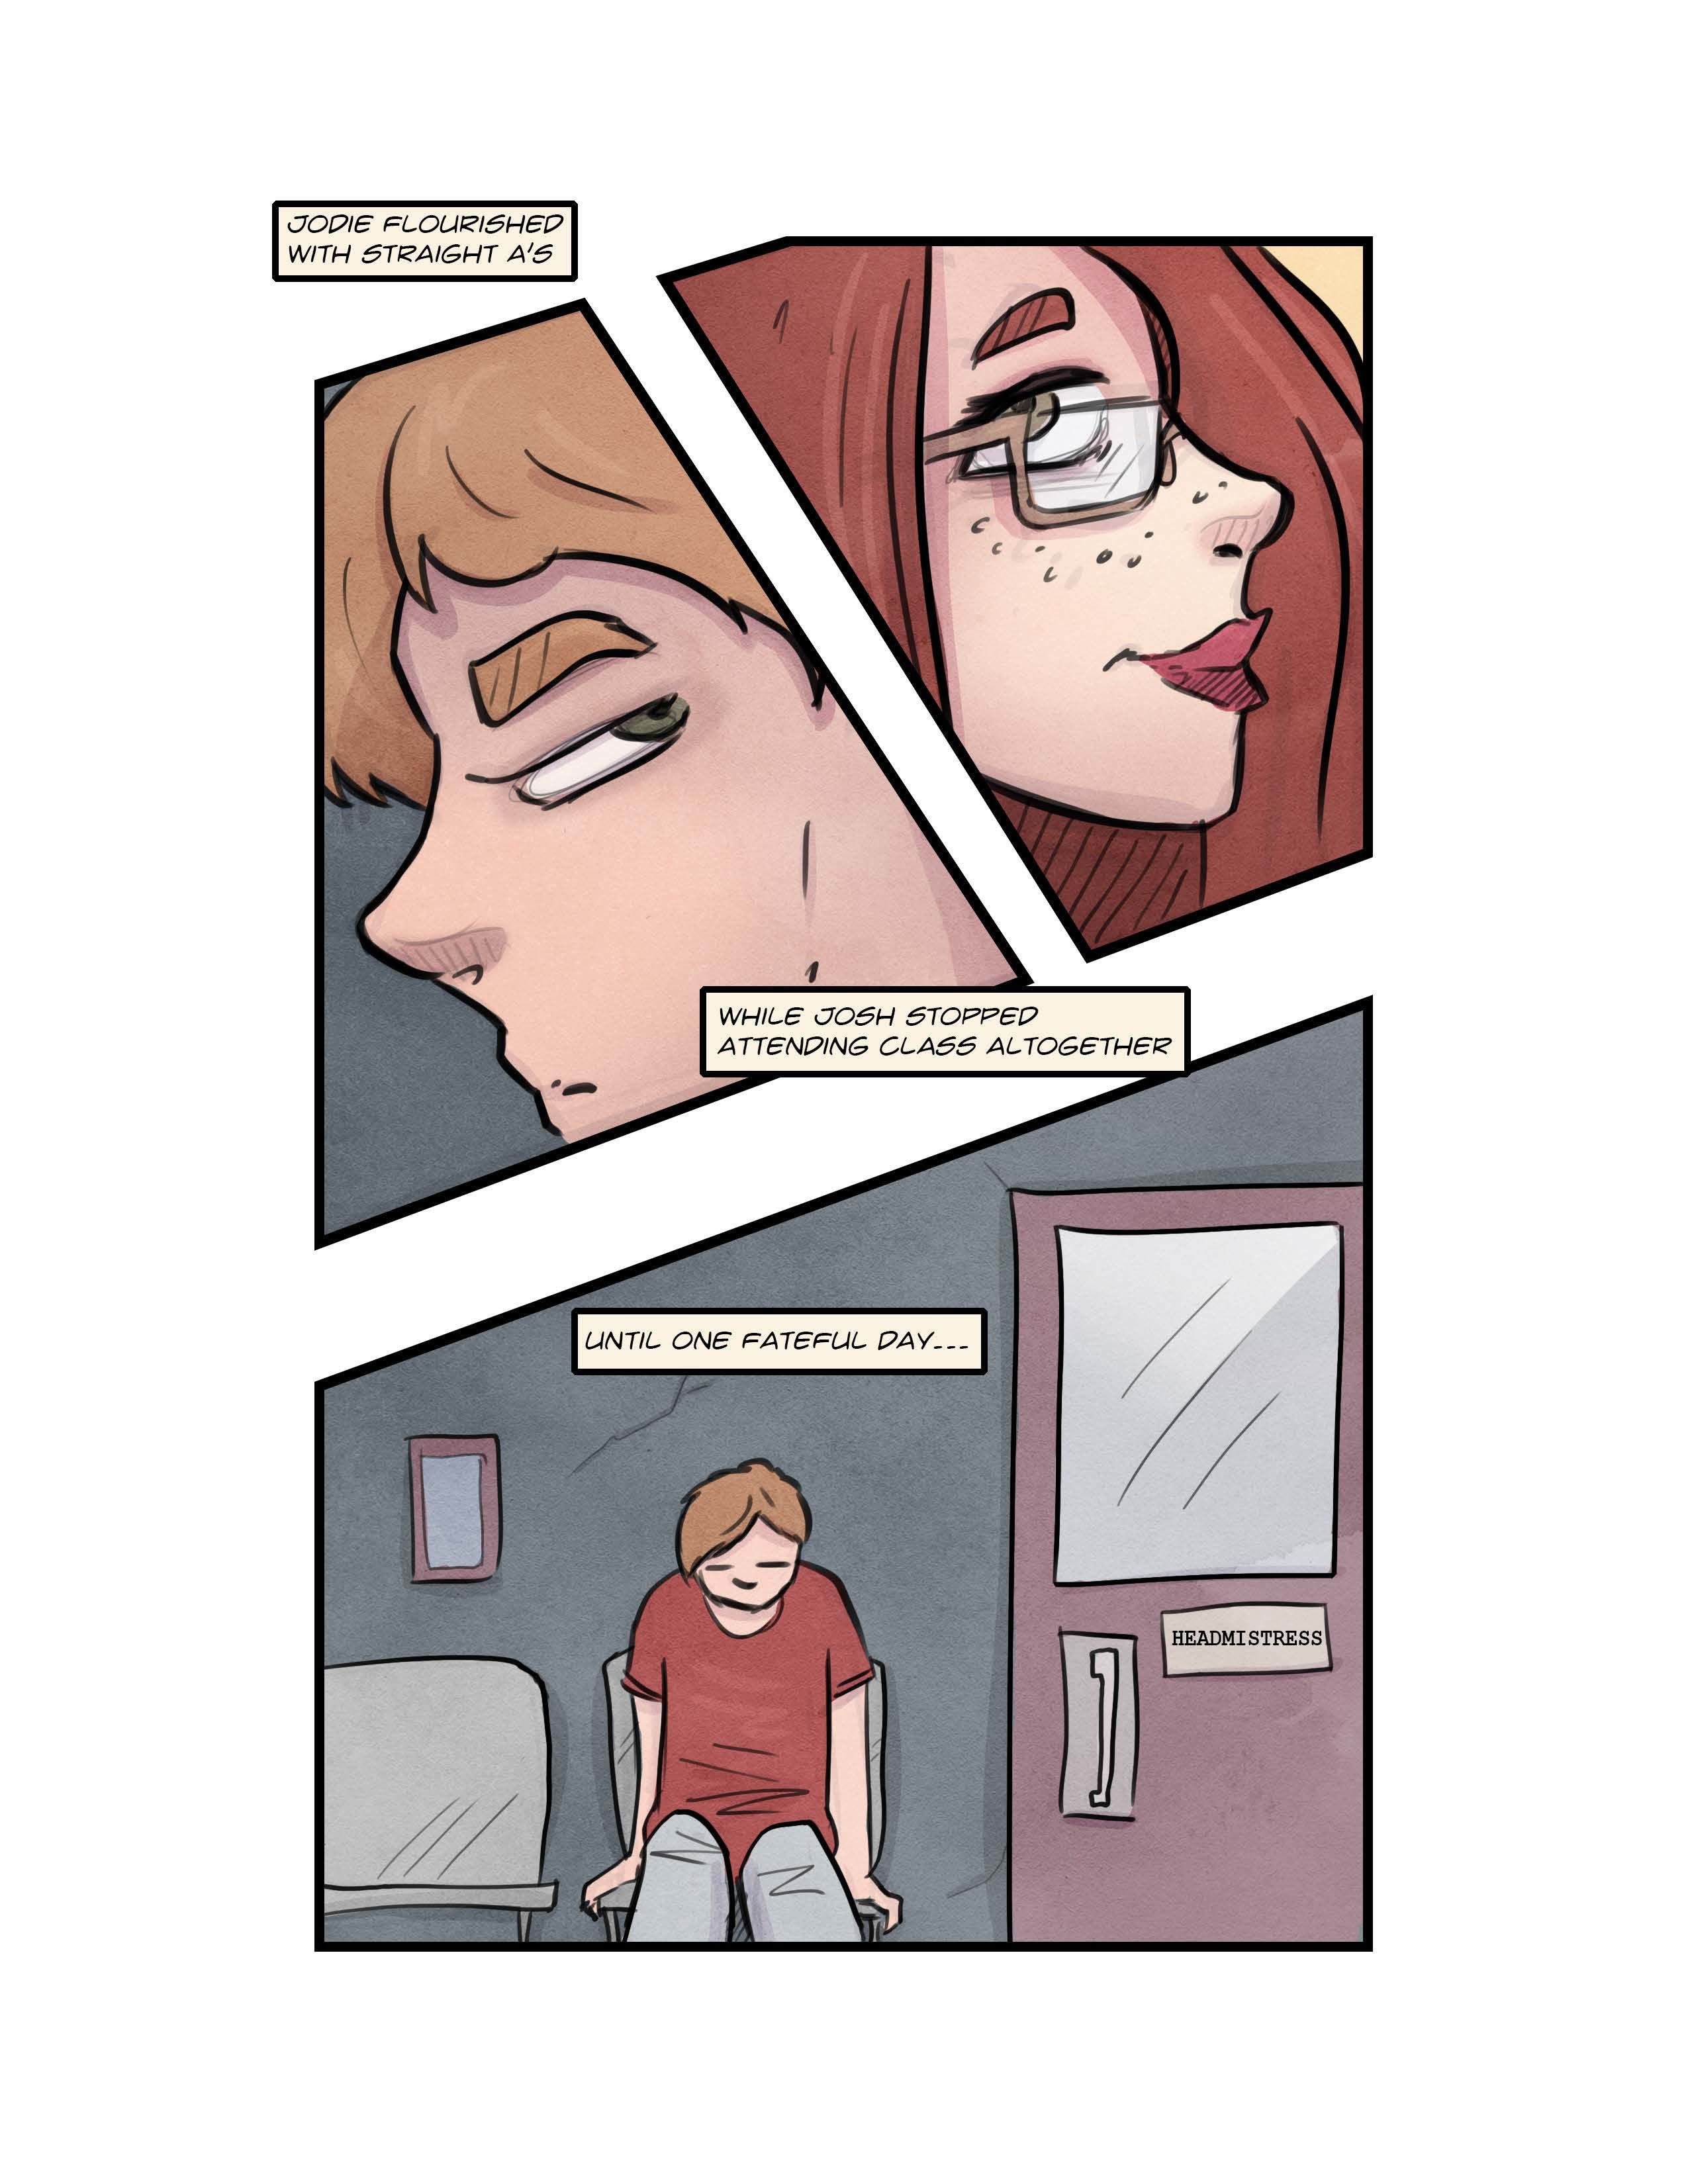 The New Girl Issue 1-5 by Grumpy TG page 11